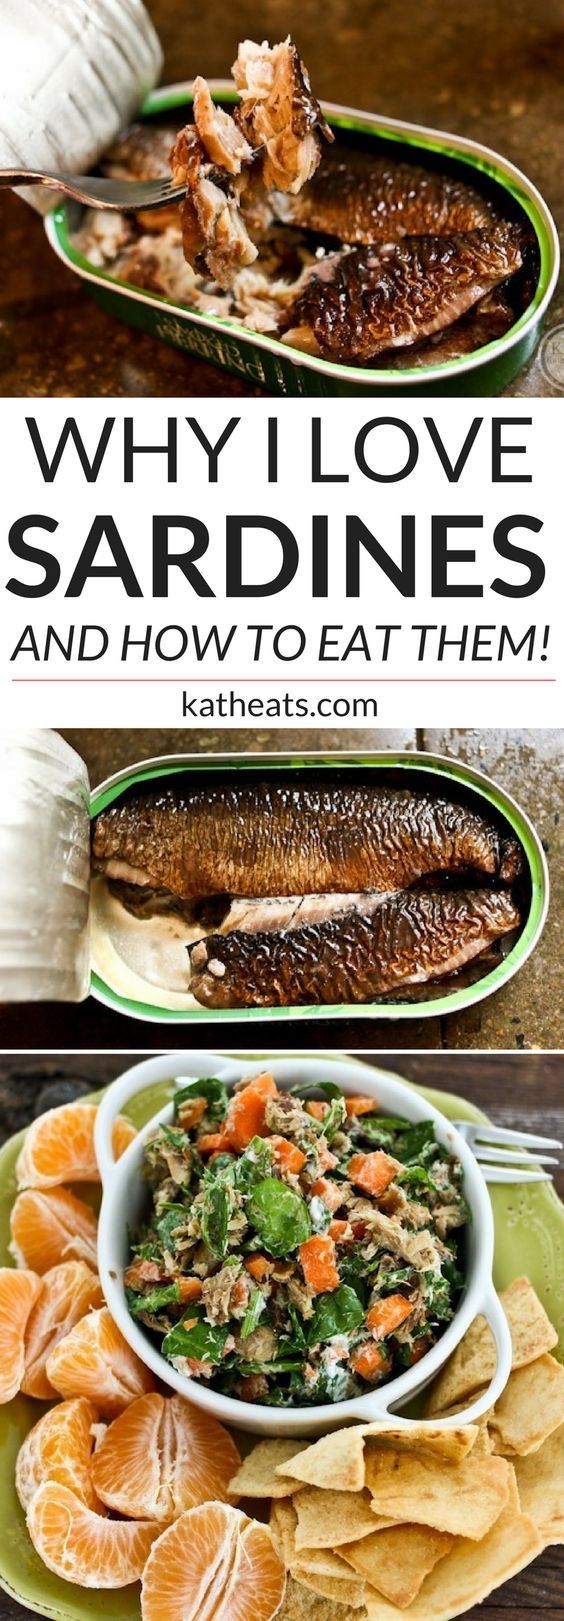 Are sardines so good for you?